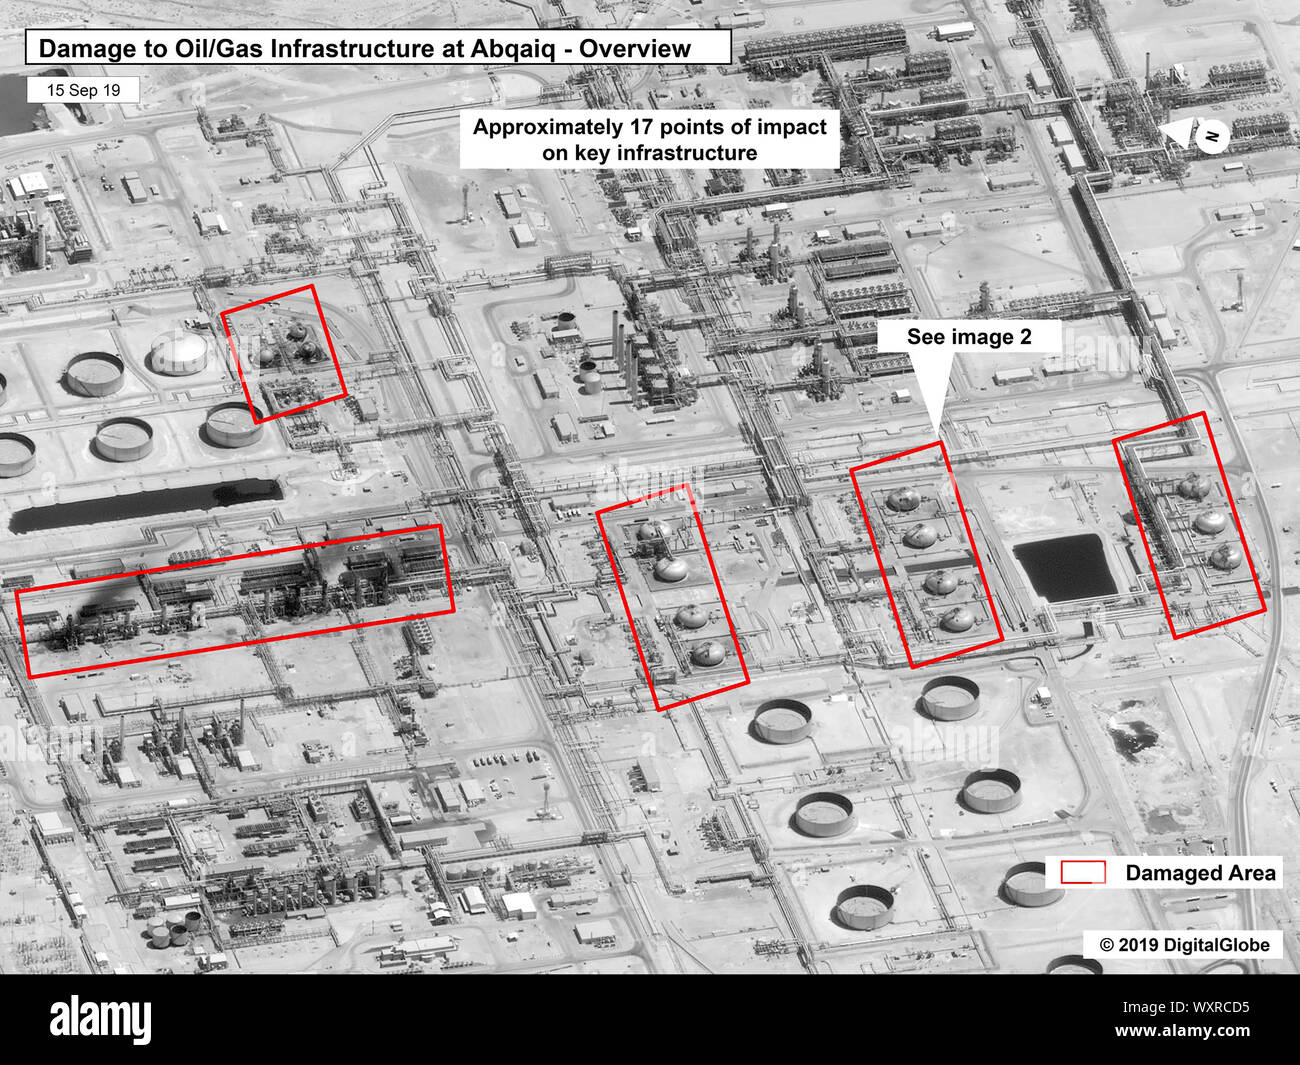 Saudi Arabia. 17th Sep 2019. Imagery released 15th Sep 2019. The damage caused by a drone attack on Saudi Aramco's Abaqaiq oil processing facility in Buqyaq, Saudi Arabia, can be seen in this image released by the U.S. government and DigitalGlobe on September 15, 2019. The attack on this and Saudi Aramco's Kuirais oil field has halted oil production of 5.7 million barrels of crude oil per day. Photo via U.S. Government/DigitalGlobe/UPI Credit: UPI/Alamy Live News Stock Photo